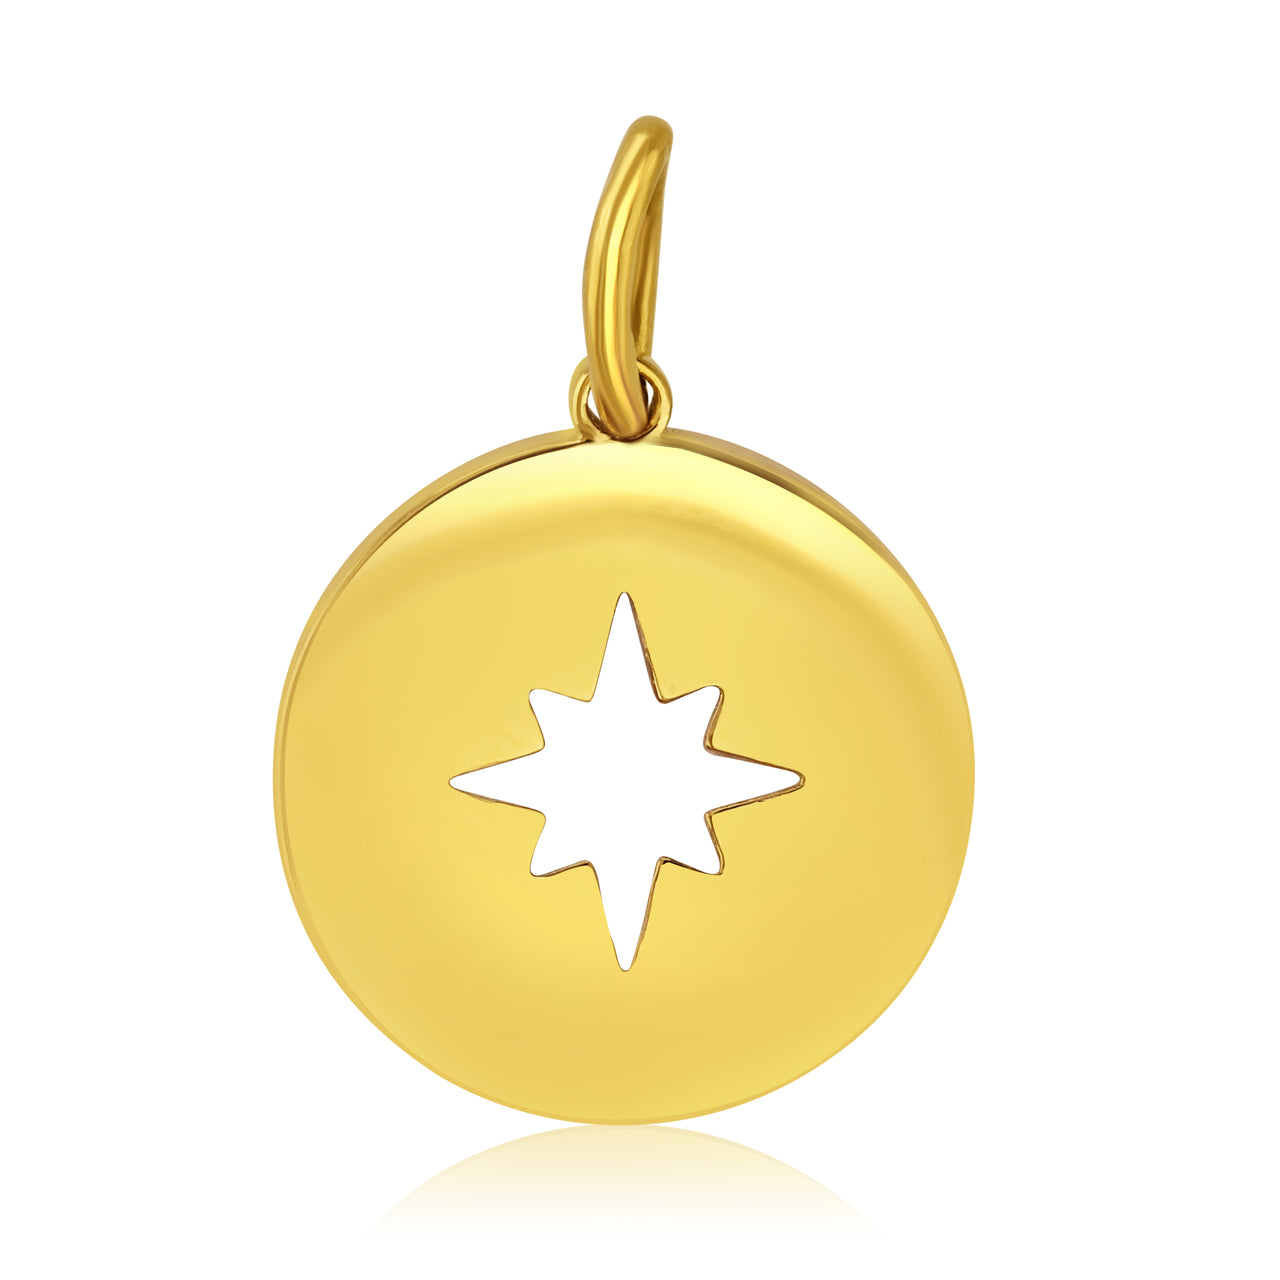 Round compass charm with pearlescent enamel